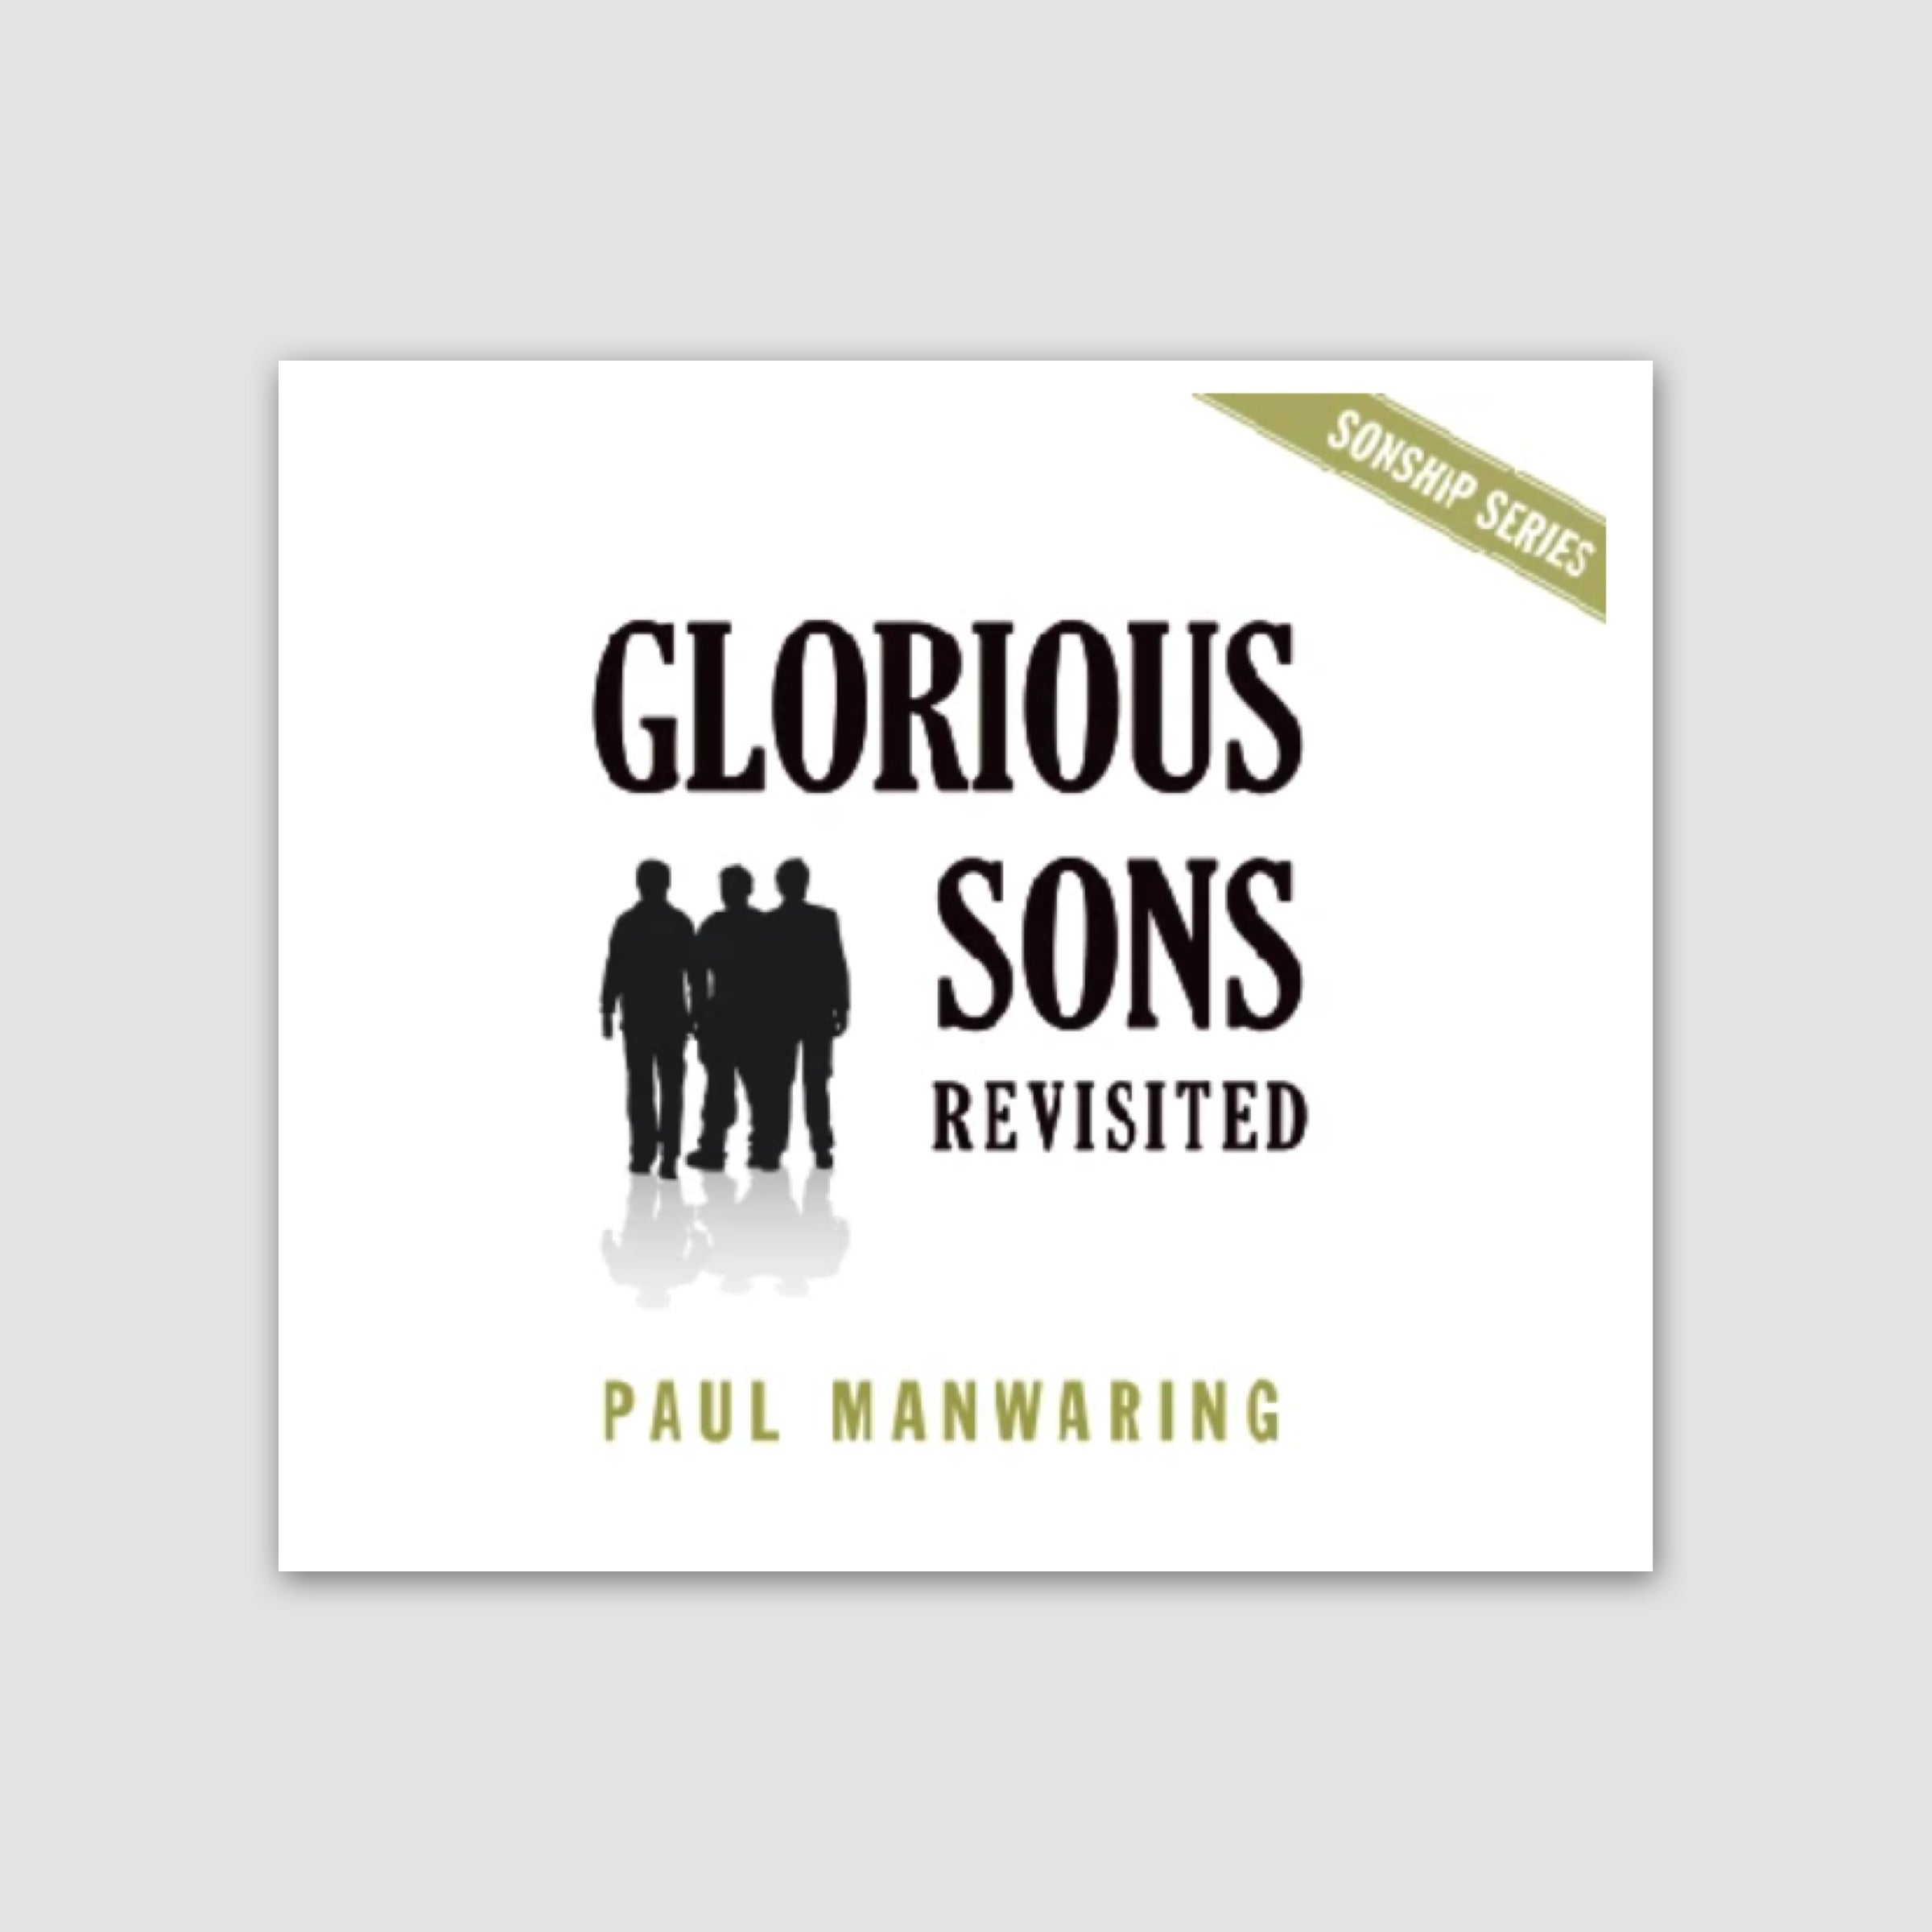 Glorious Sons Revisited